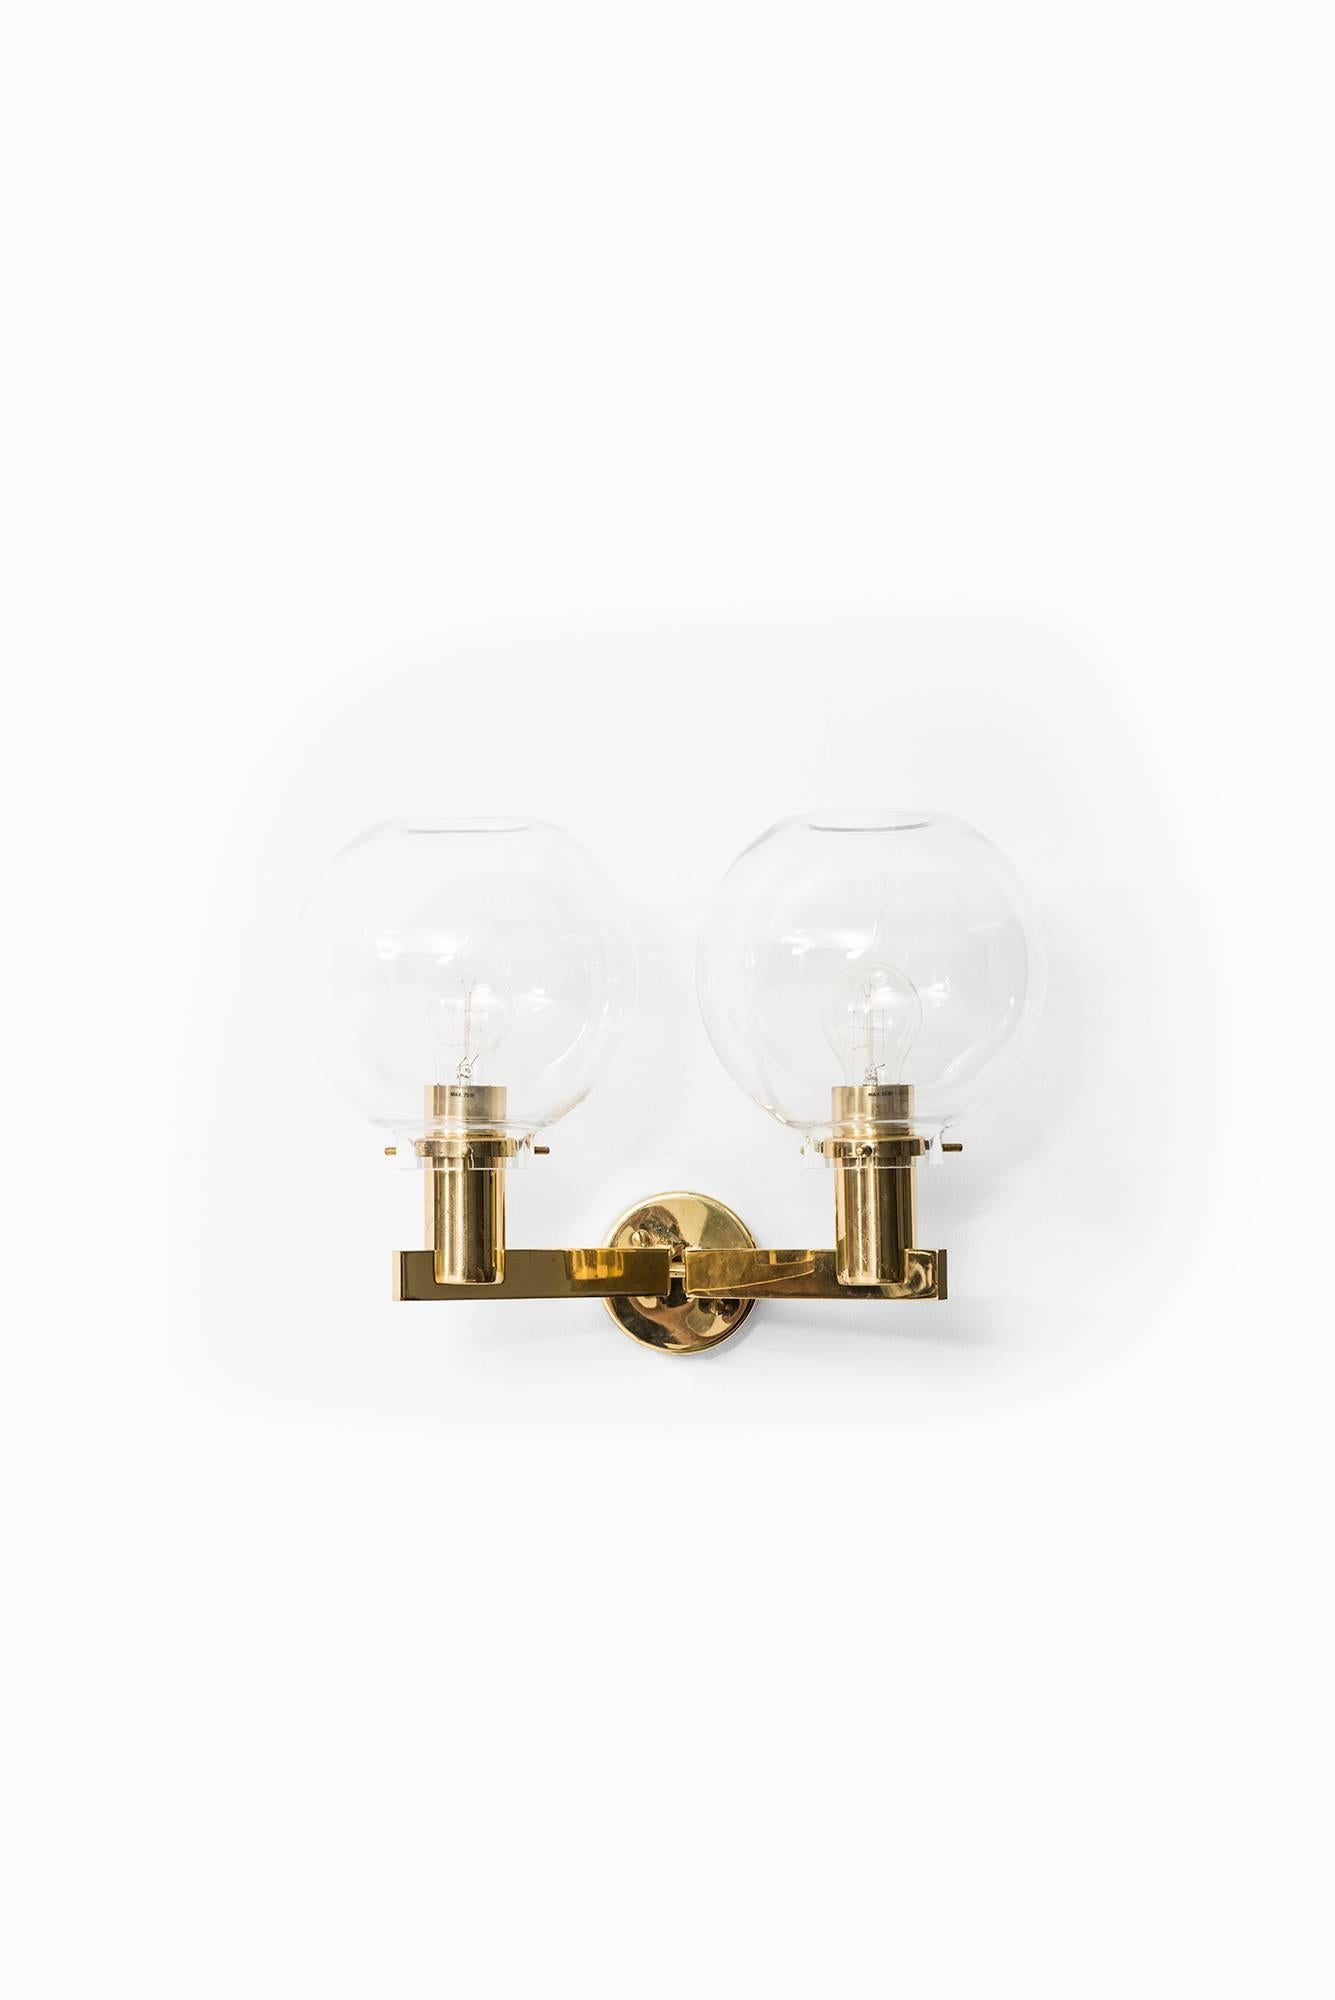 Rare set of four wall lamps model V-305/2 designed by Hans-Agne Jakobsson. Produced by Hans-Agne Jakobsson AB in Markaryd, Sweden.